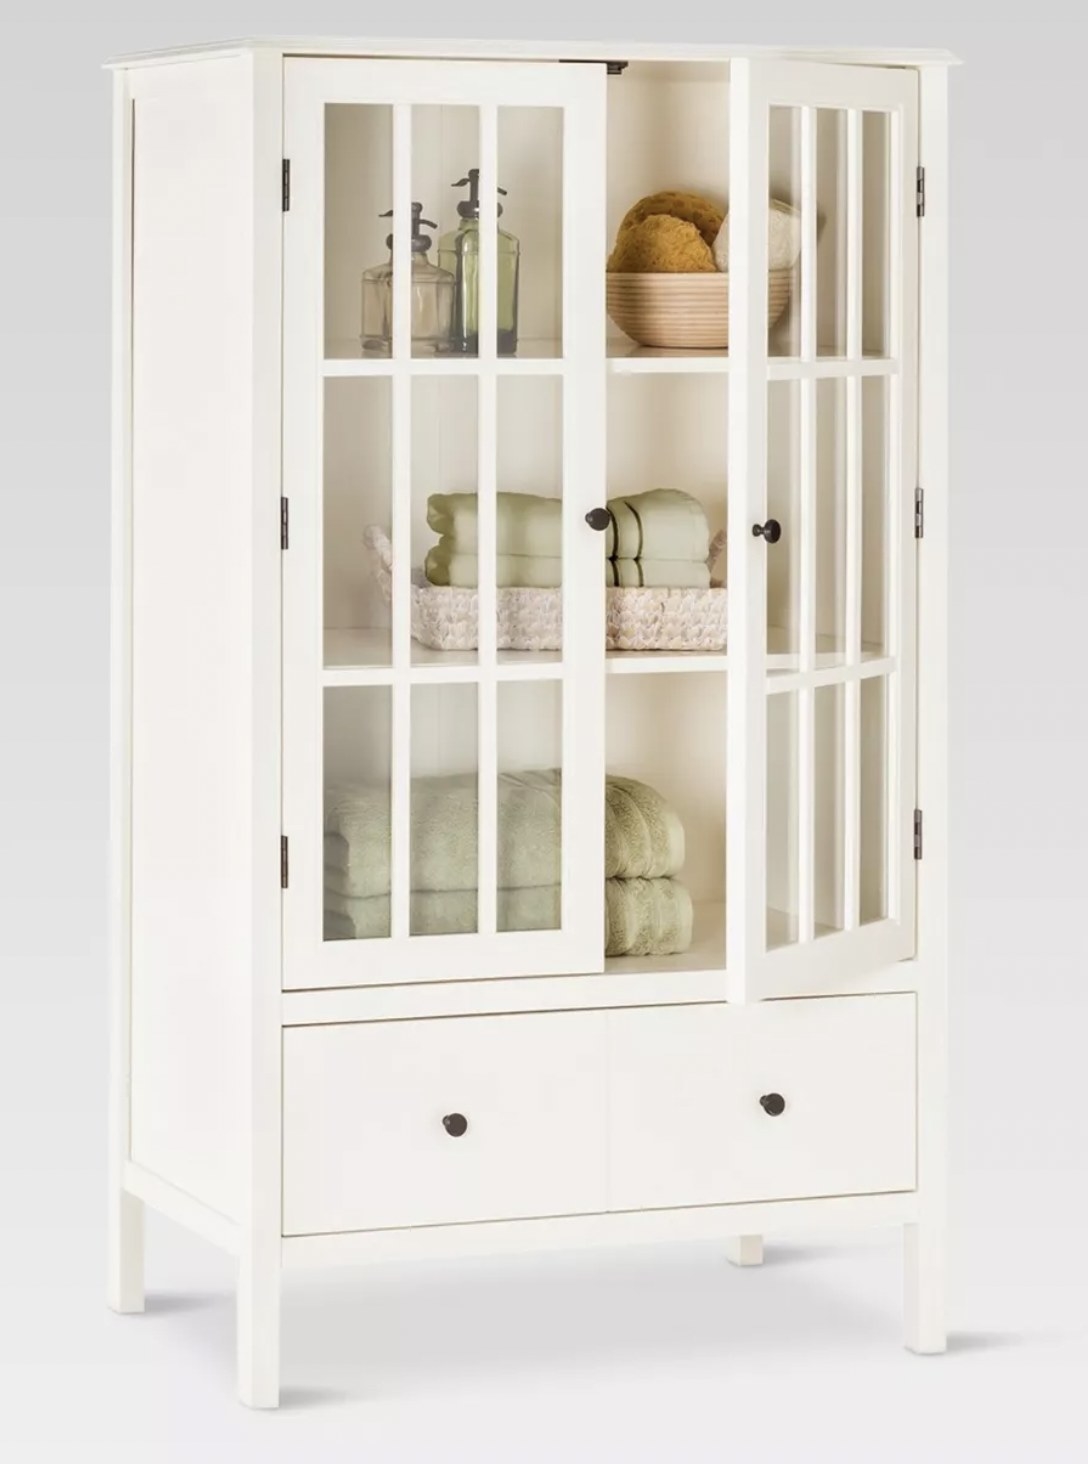 a cream colored tall cabinet with three shelves behind glass doors. Under the shelves are two drawers with black metal hardware